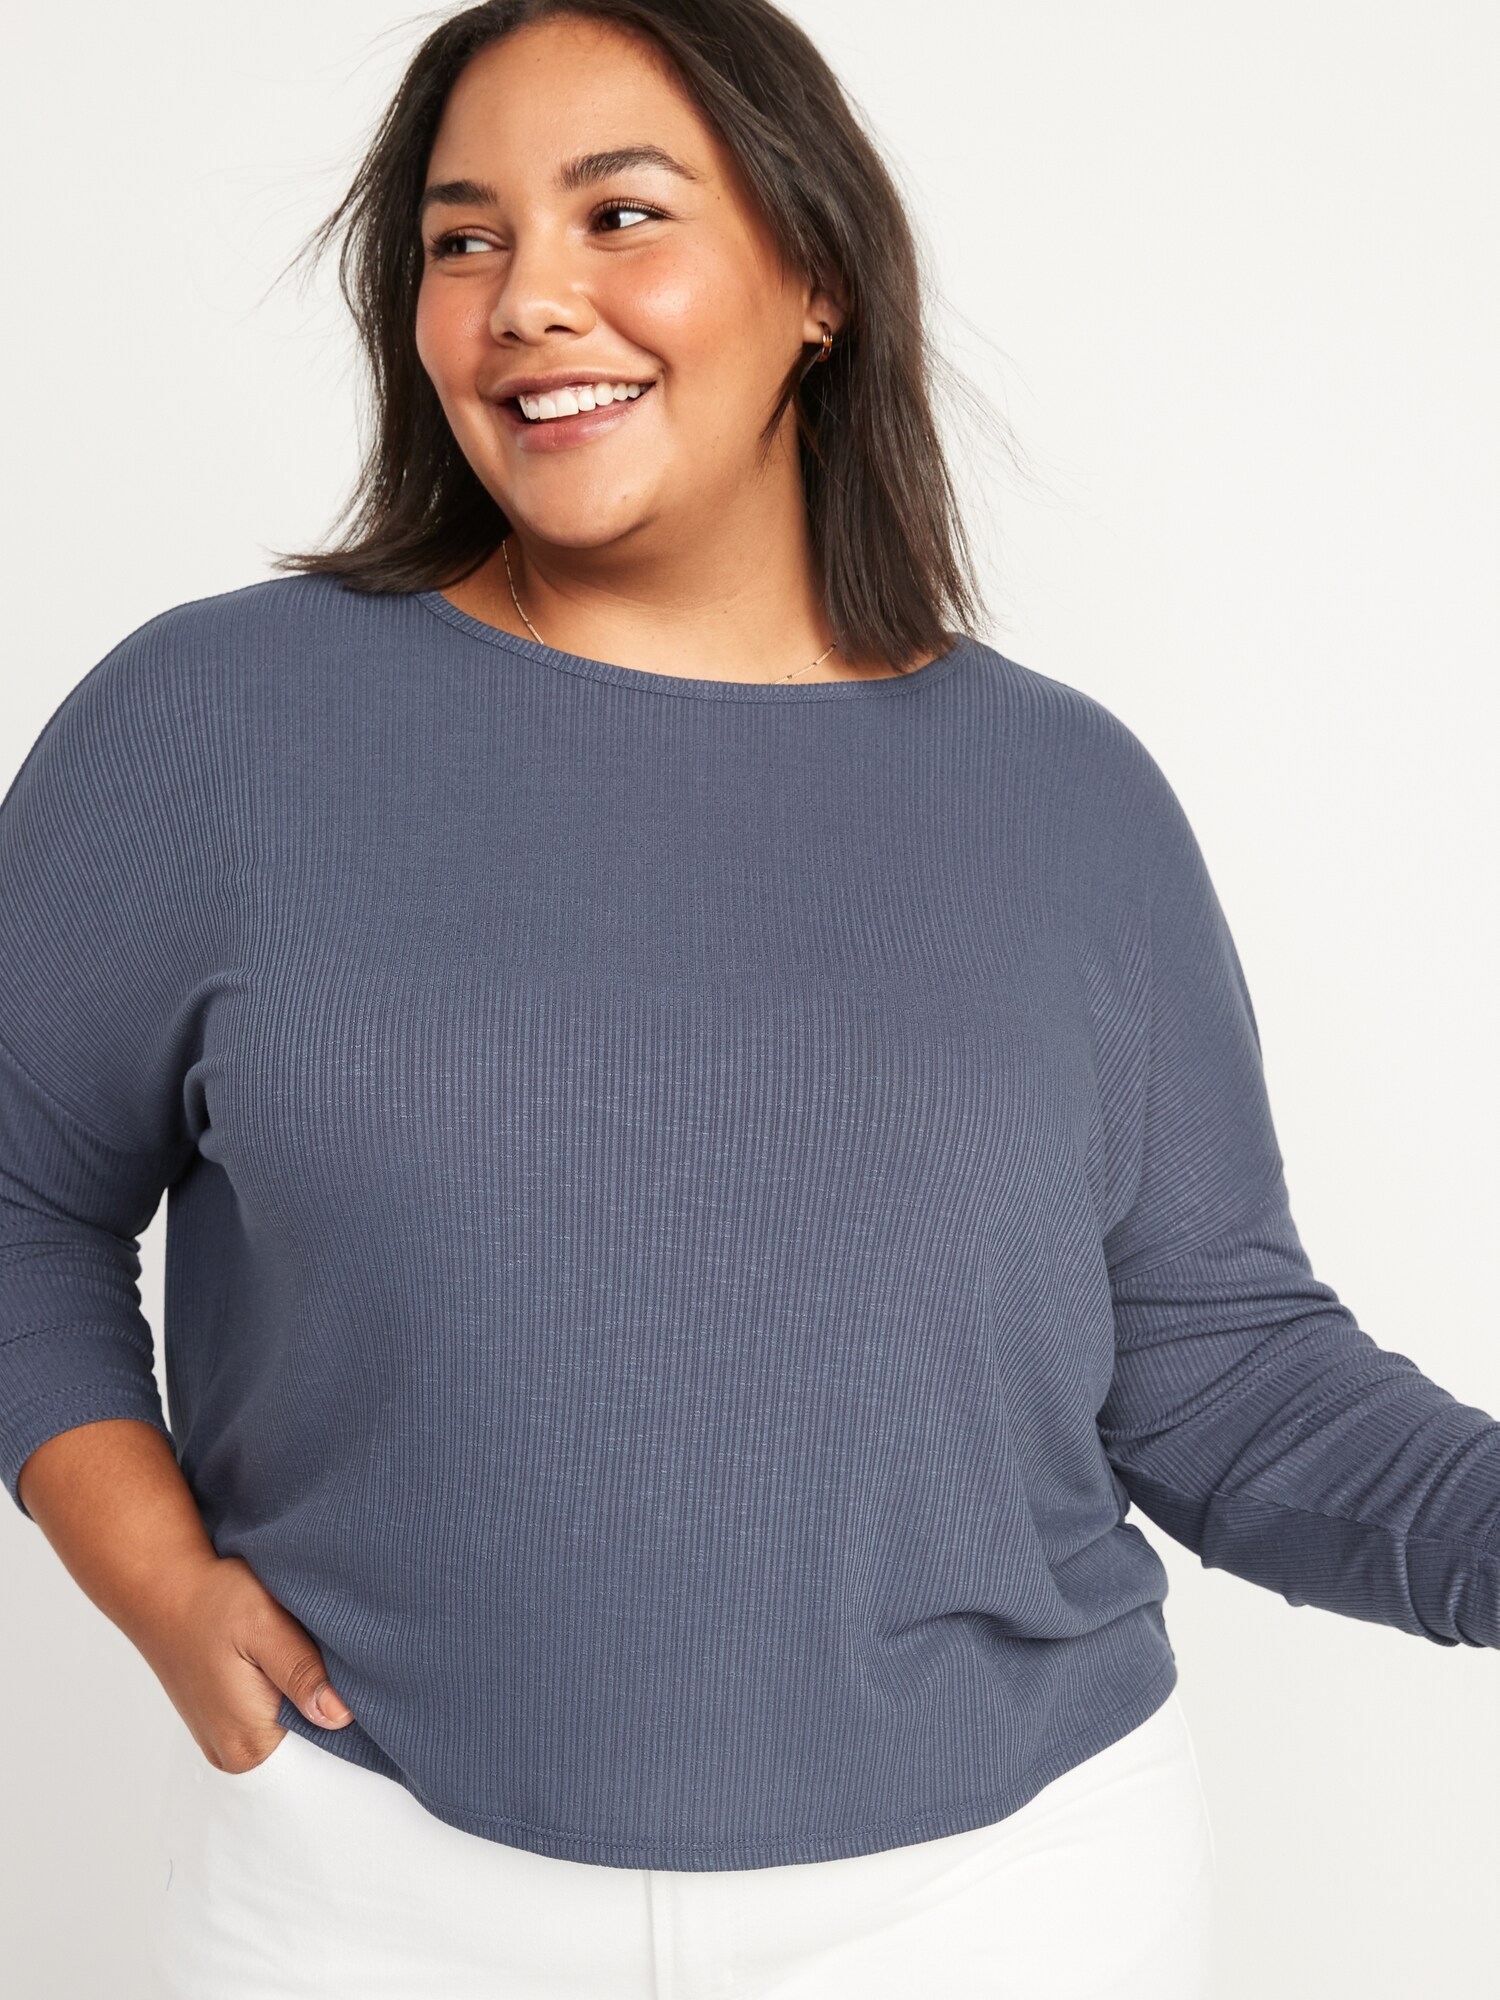 Long-Sleeve Luxe Oversized Rib-Knit T-Shirt for Women | Old Navy